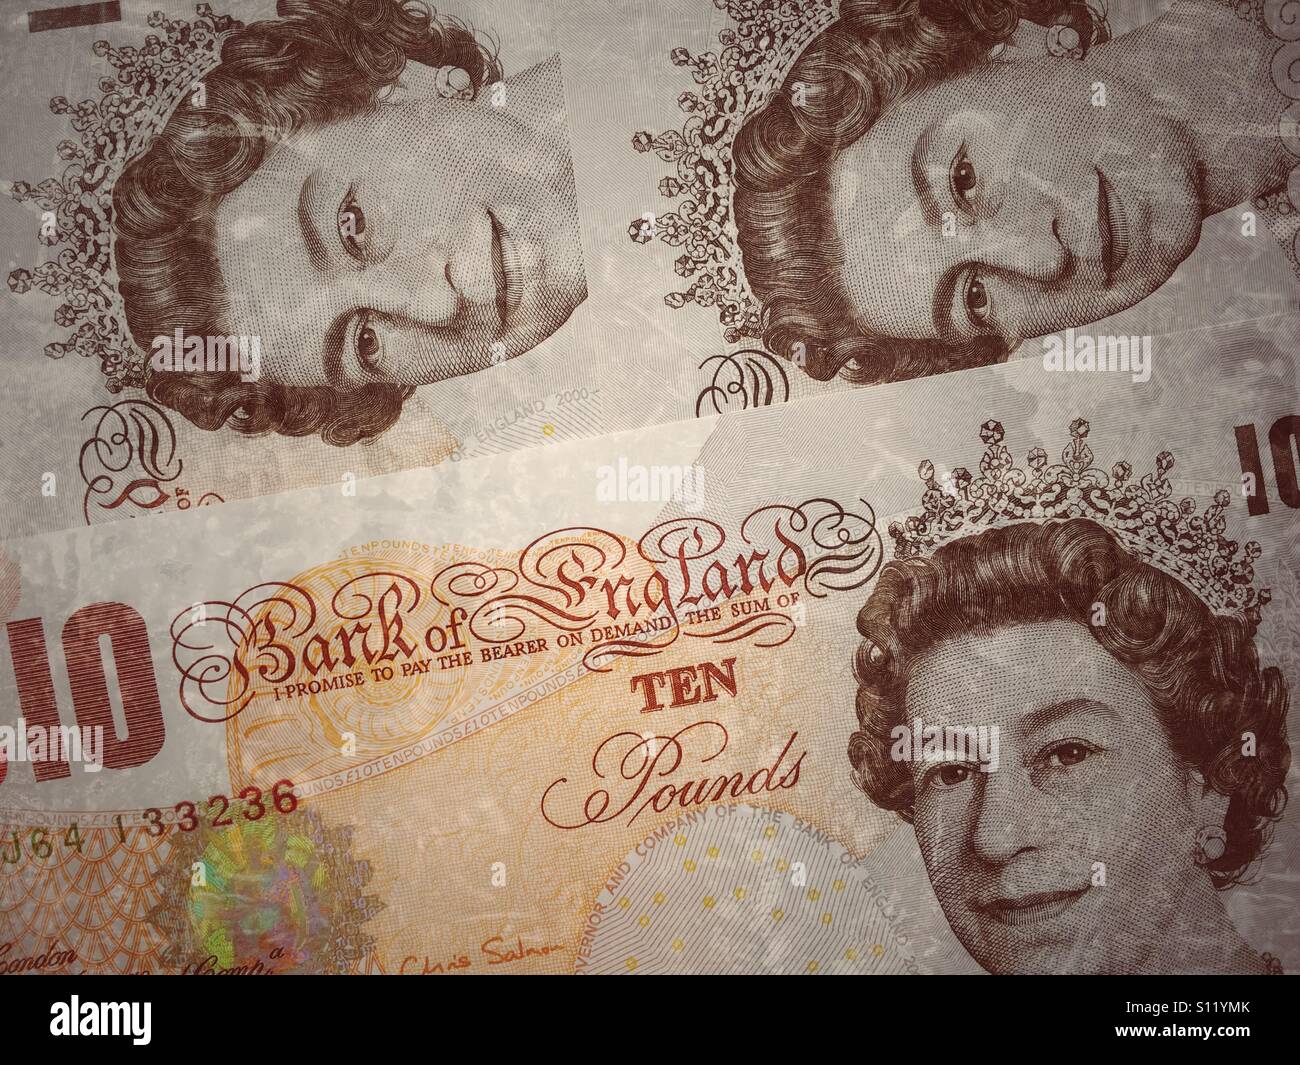 Three Bank of England Ten Pound Notes arranged in a way so that Queen Elizabeth II's portrait is clearly visible. Photograph © COLIN HOSKINS. Stock Photo